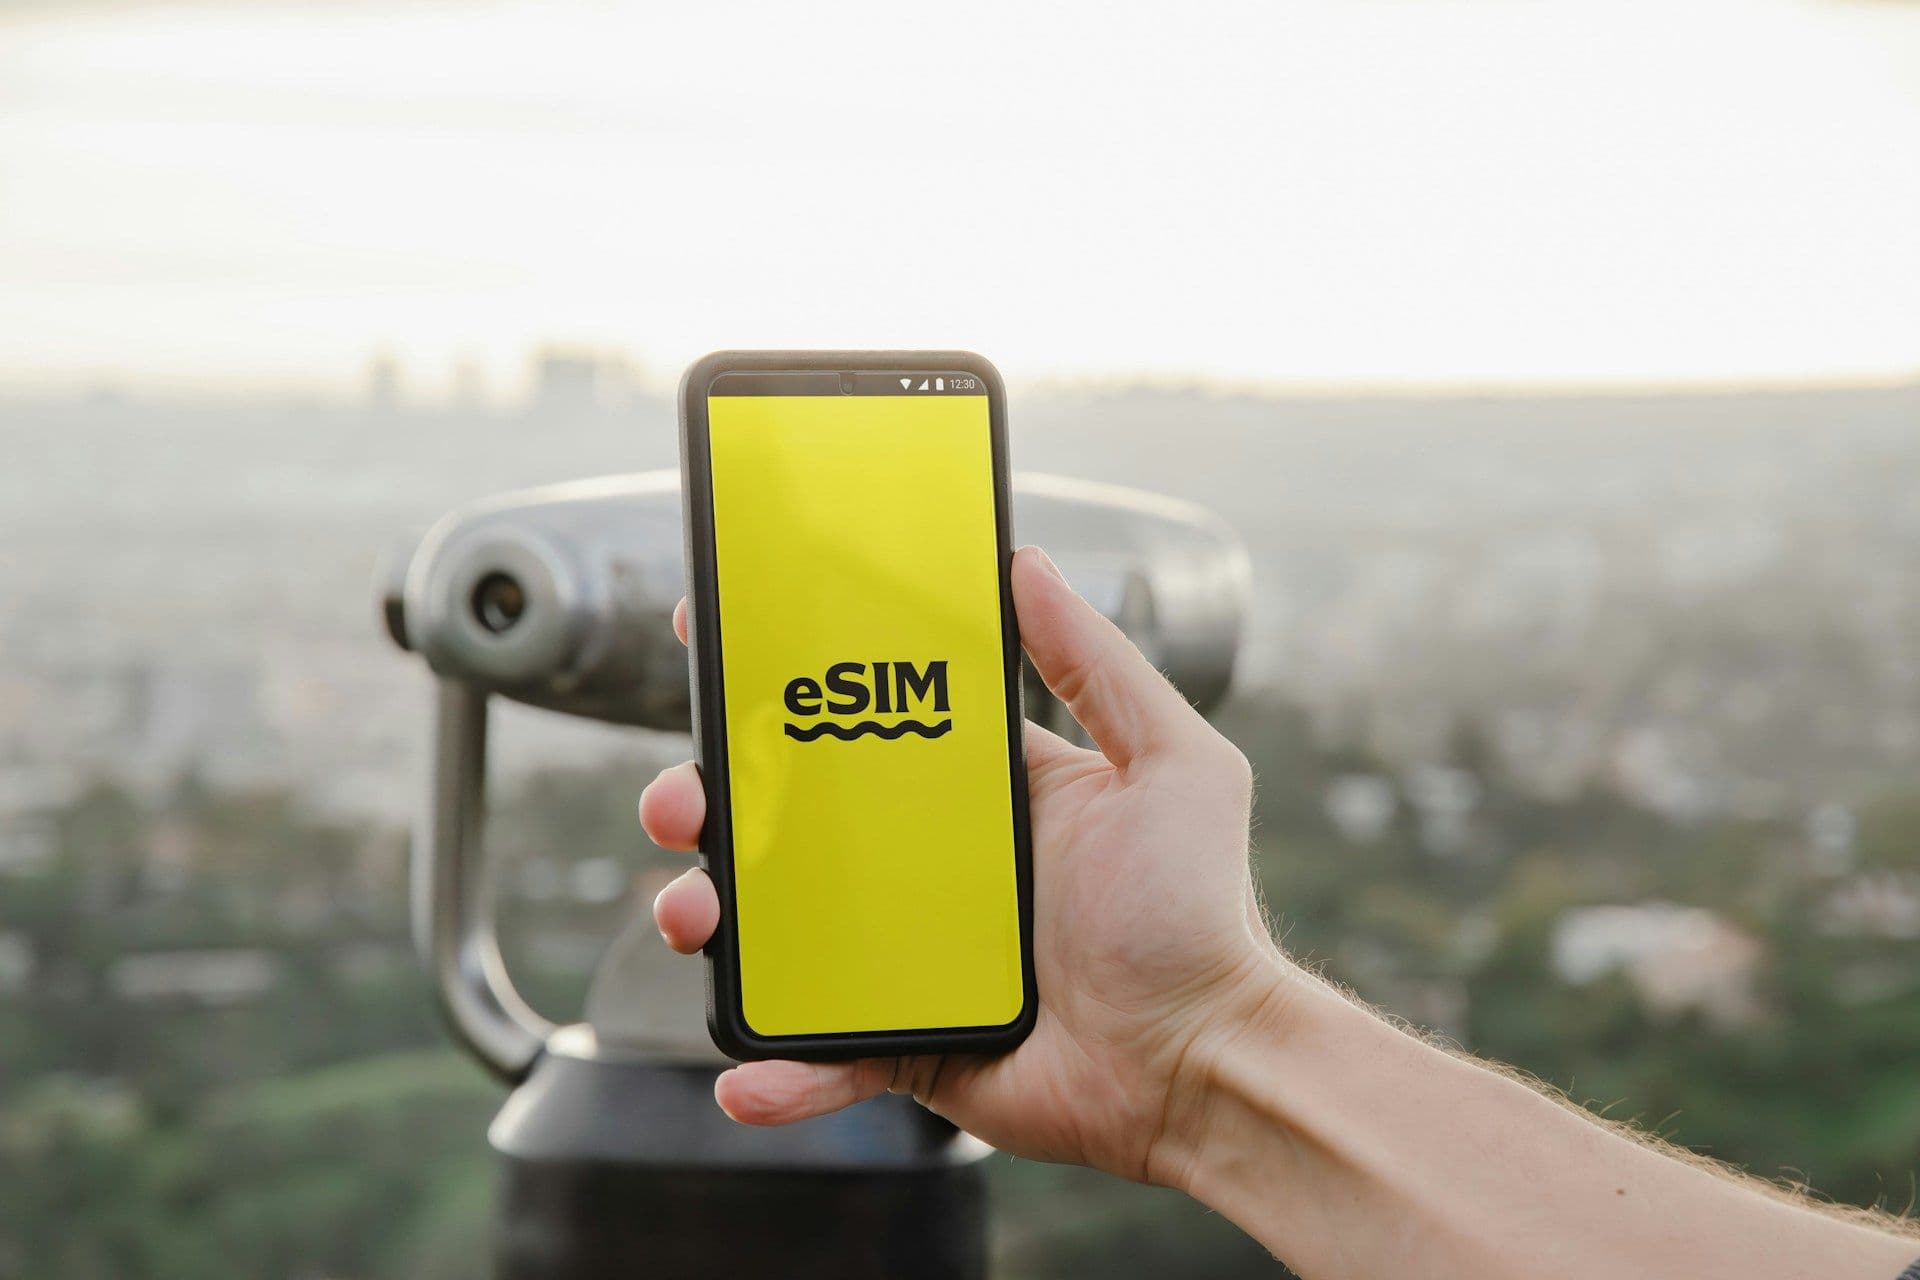 All About eSIM - The Future of Mobile Connectivity